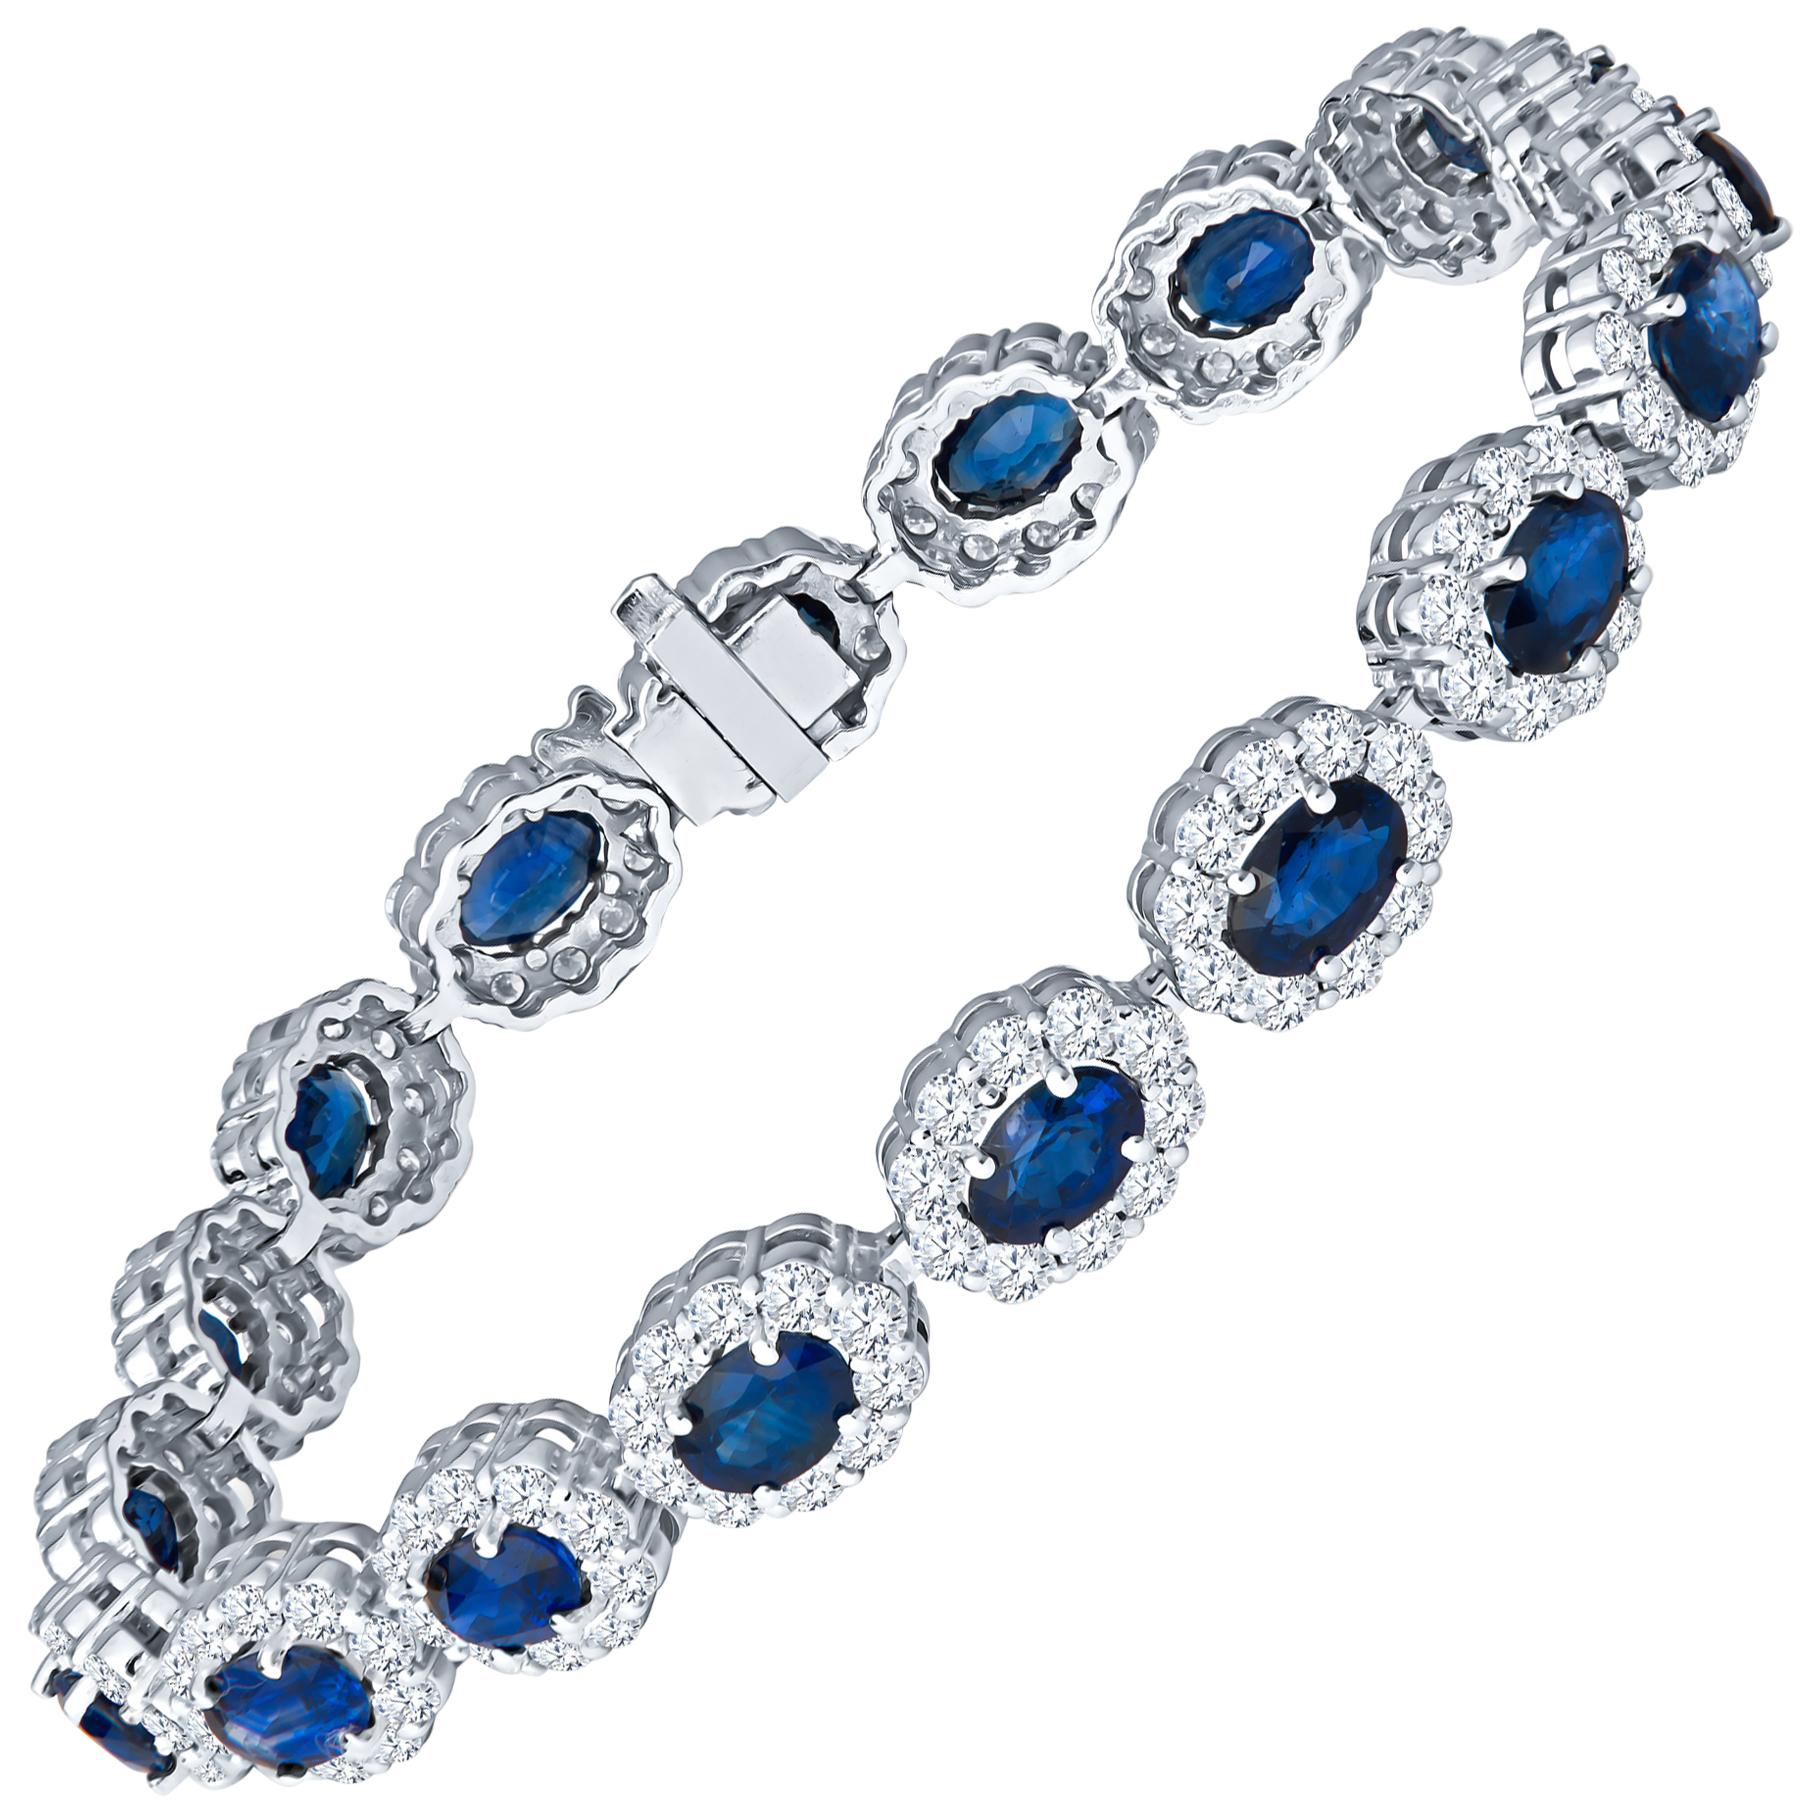 9.21ct Oval Blue Sapphire and 5.56ct Round Diamond Halo 14kt White Gold Bracelet